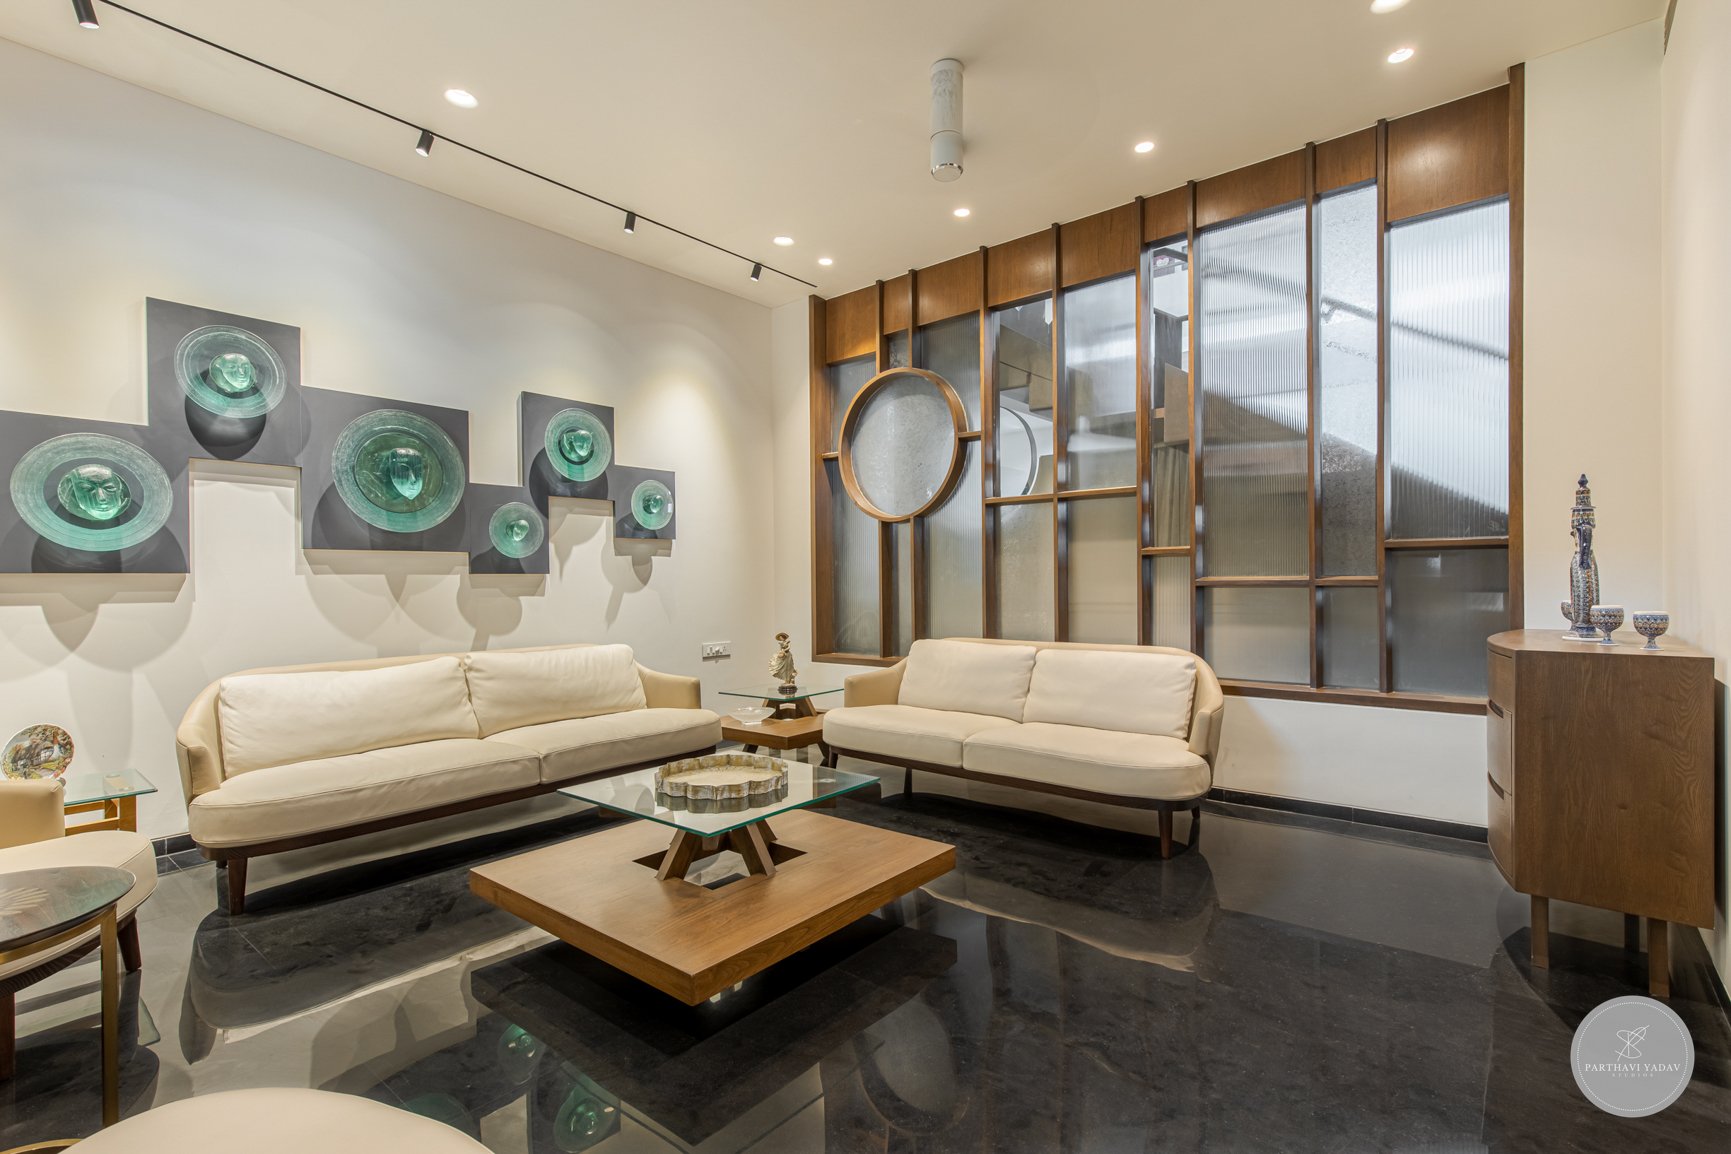 best interior photographer in pune bangalore - glass sculpture faces on wall of a living room with glass and wood architecture walls and leather sofas.jpg